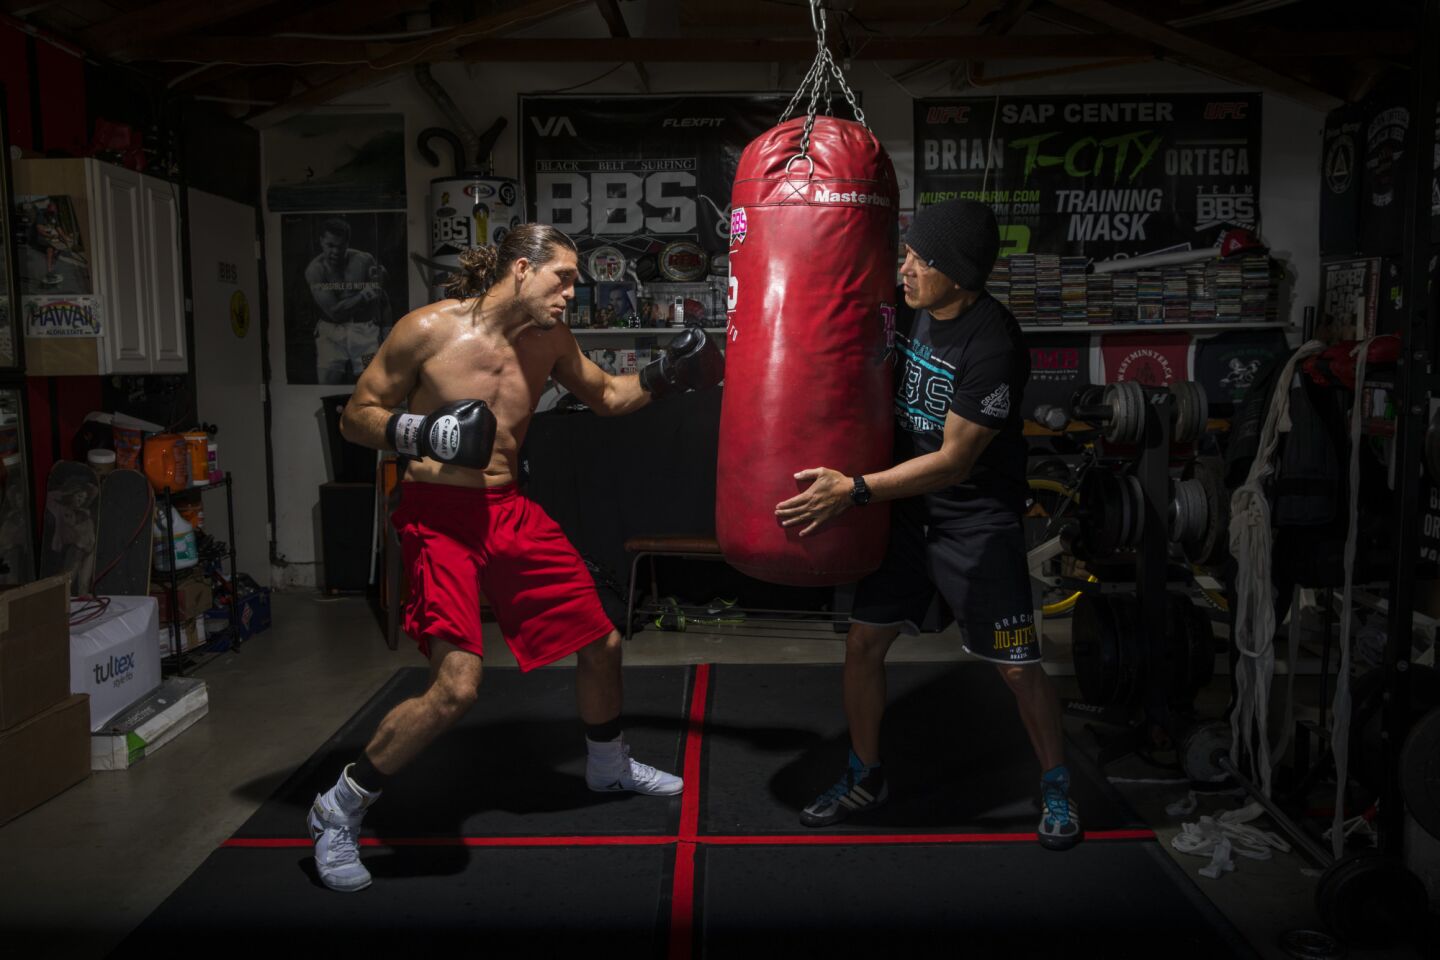 Brian "T-City" Ortega, a UFC featherweight fighter, trains on the heavy bag, in the garage of his coach, James Luhrsen, right, in the Harbor City neighborhood of Los Angeles on Feb. 22, 2018. The two met about 10 years ago in a south bay surf spot and have trained together since.